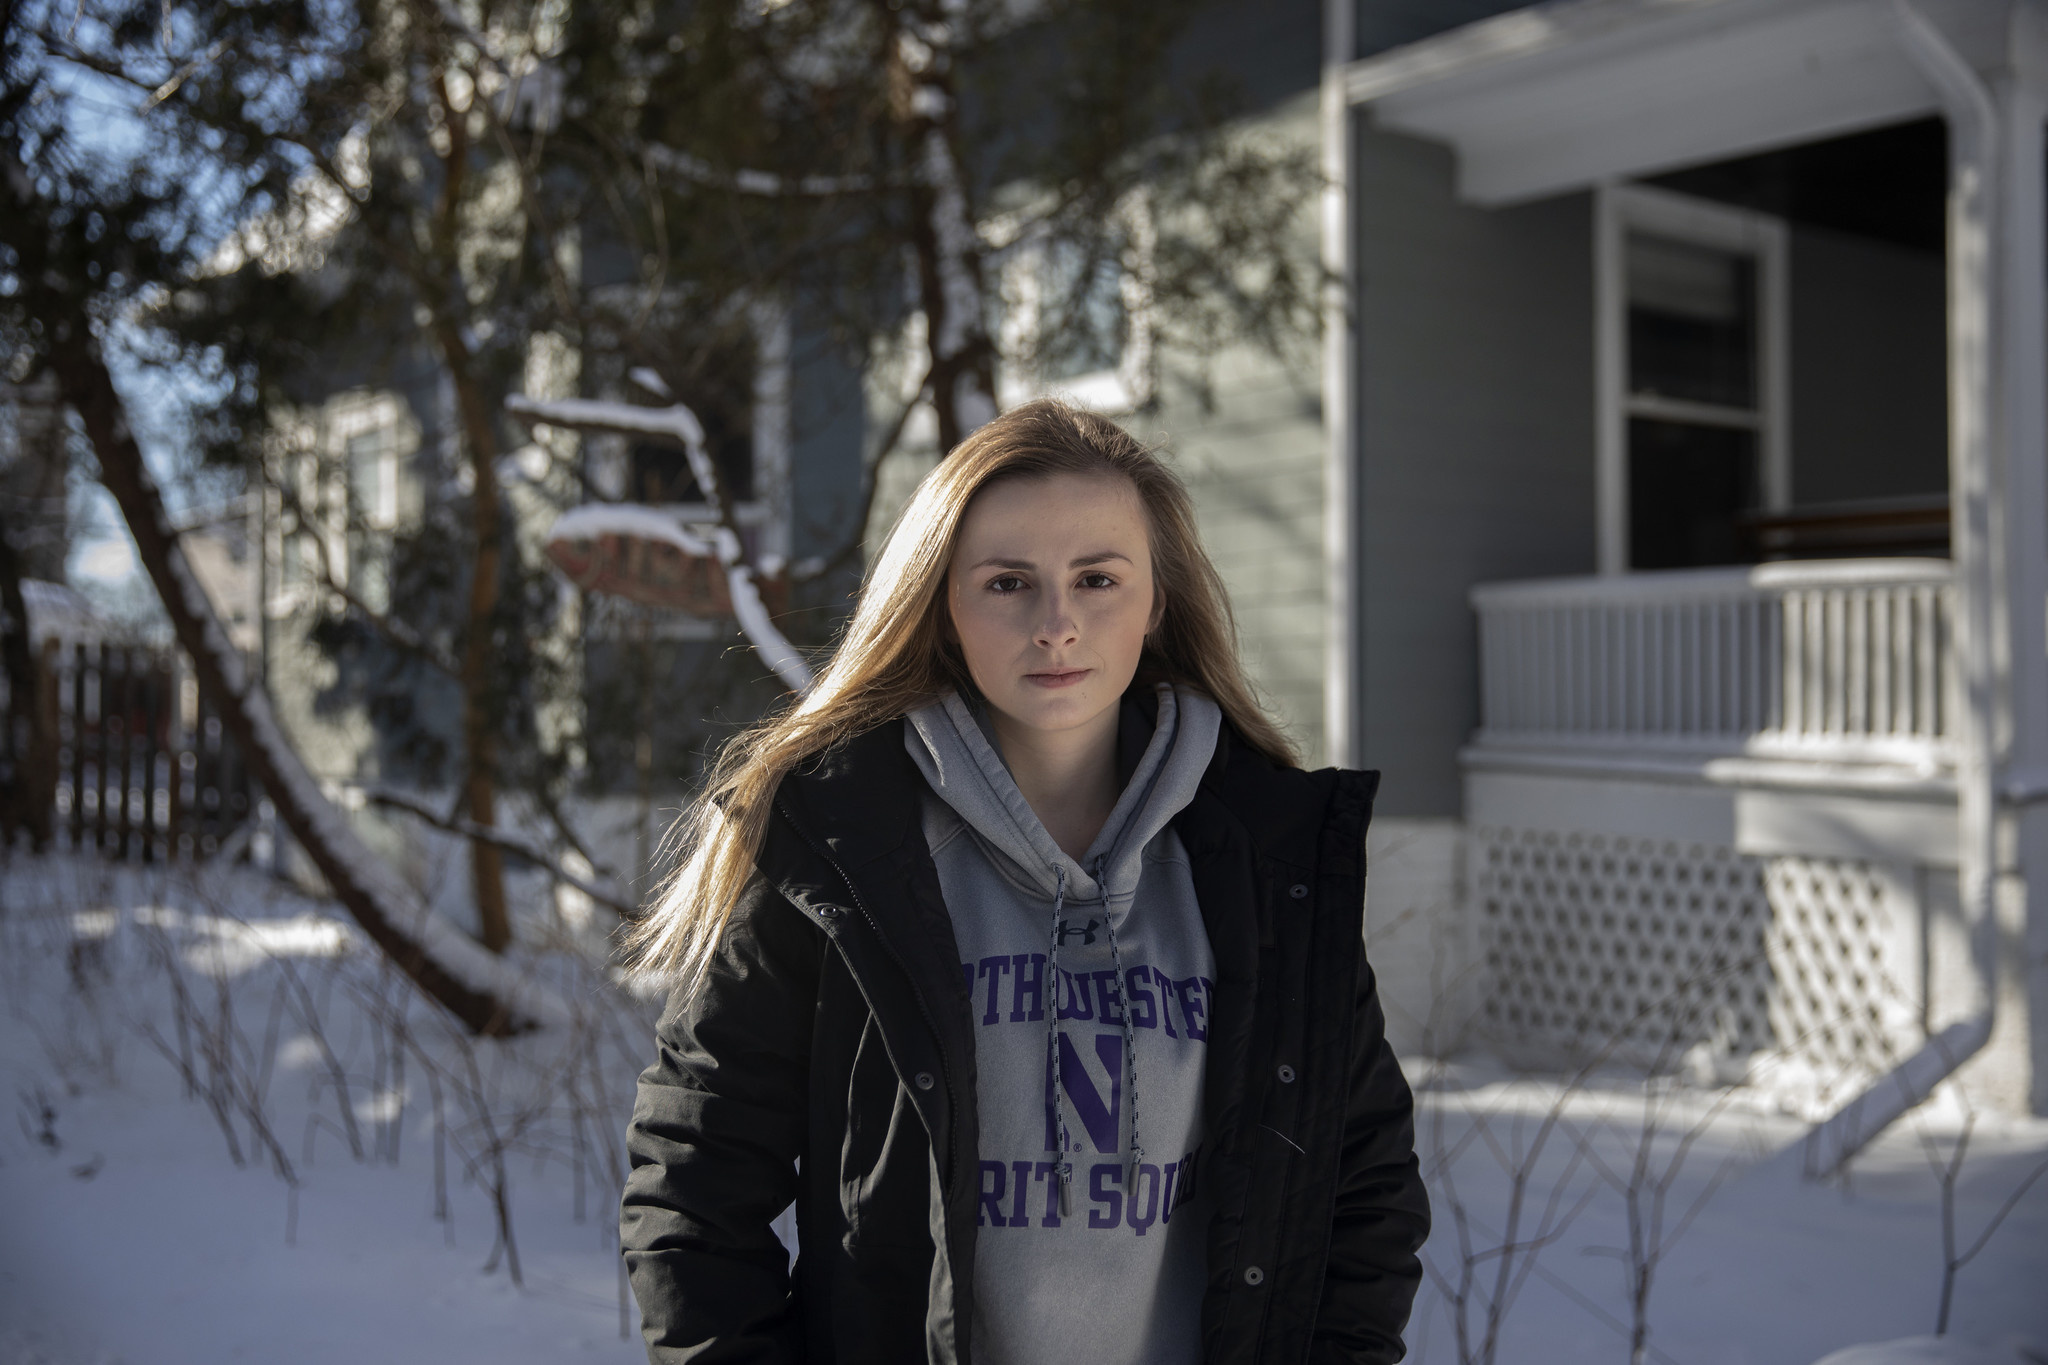 Cheerleader sues Northwestern University, says she was groped and harassed by drunken fans and that officials tried to cover up her complaints, lawsuit alleges pic pic